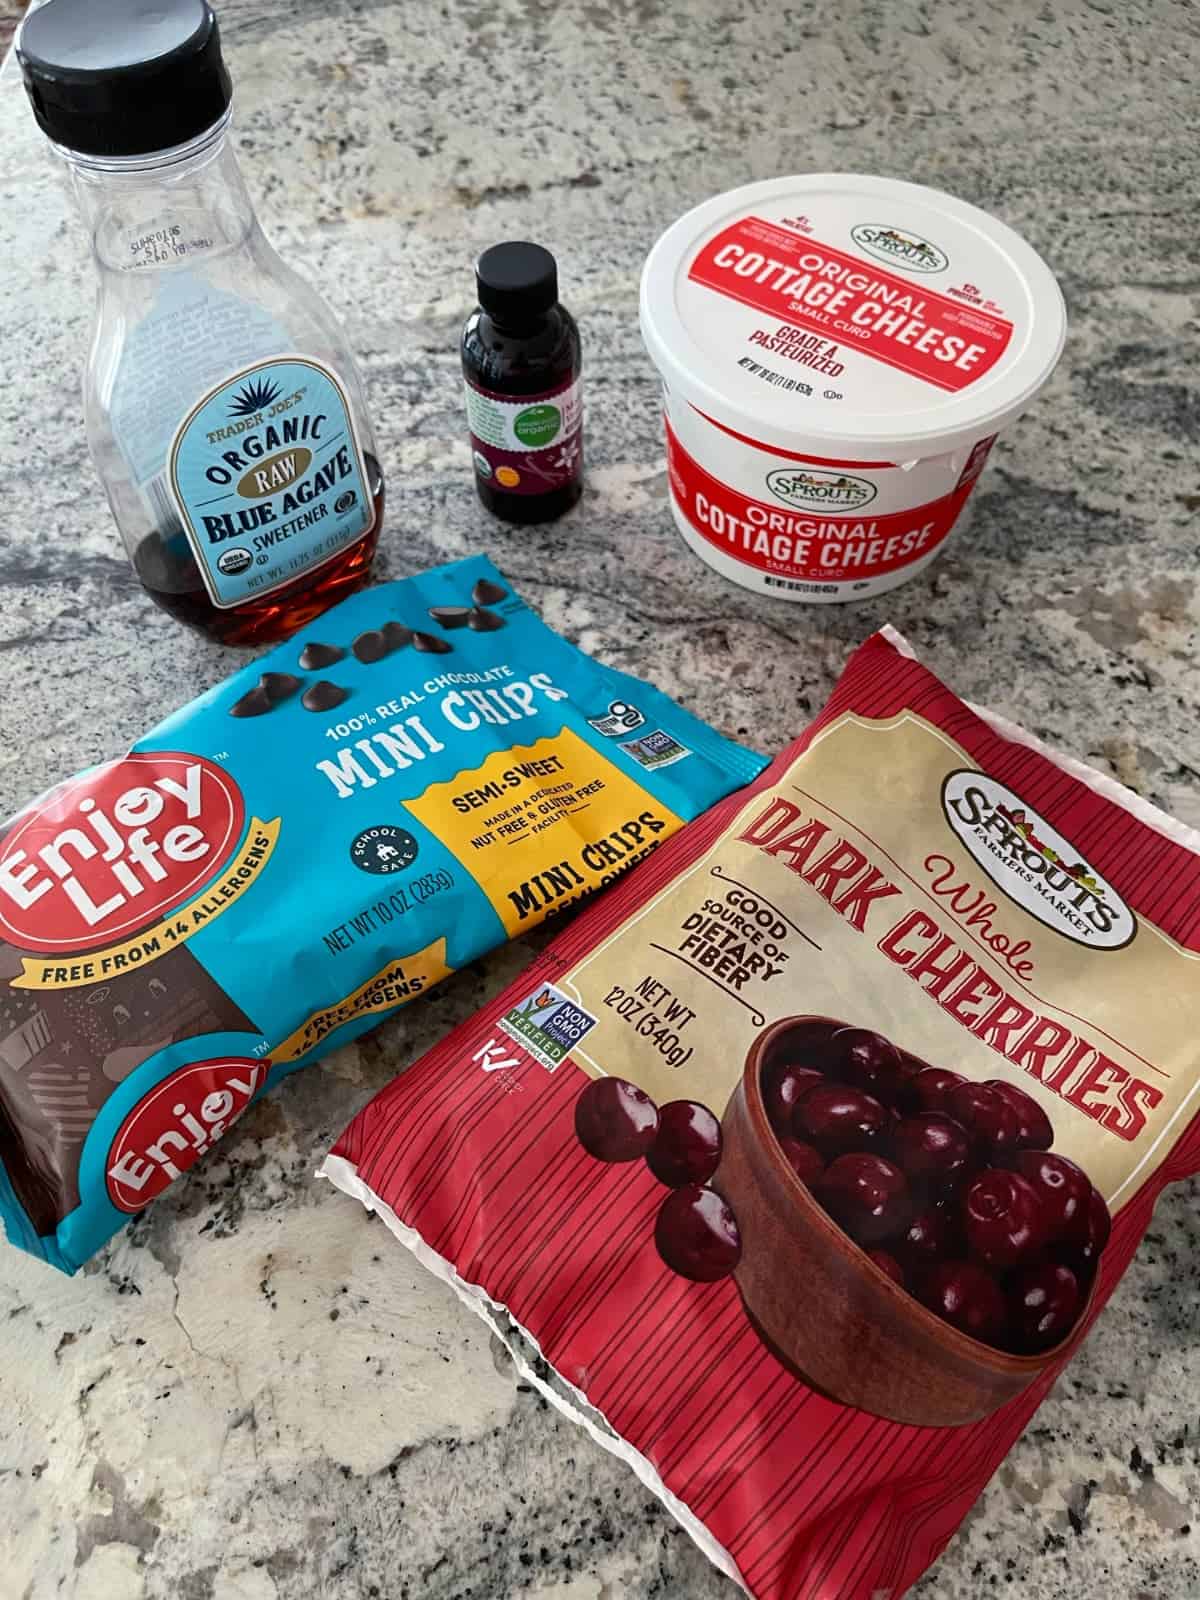 Ingredients including cottage cheese, mini chocolate chips, frozen dark cherries, agave nectar and vanilla extract.